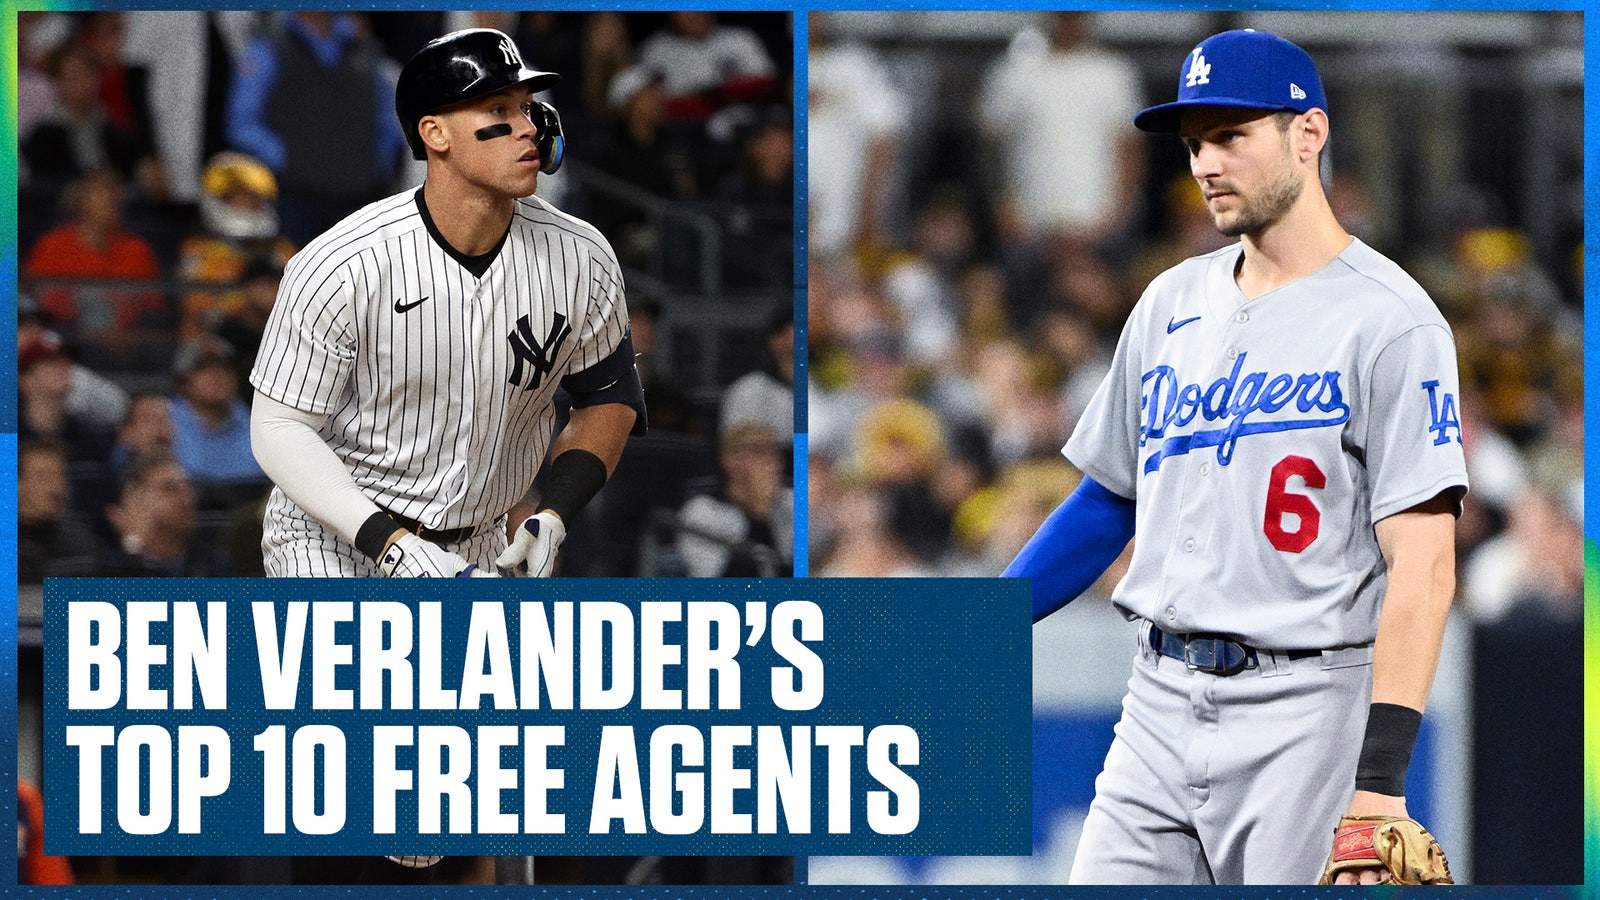  Top 10 free agents